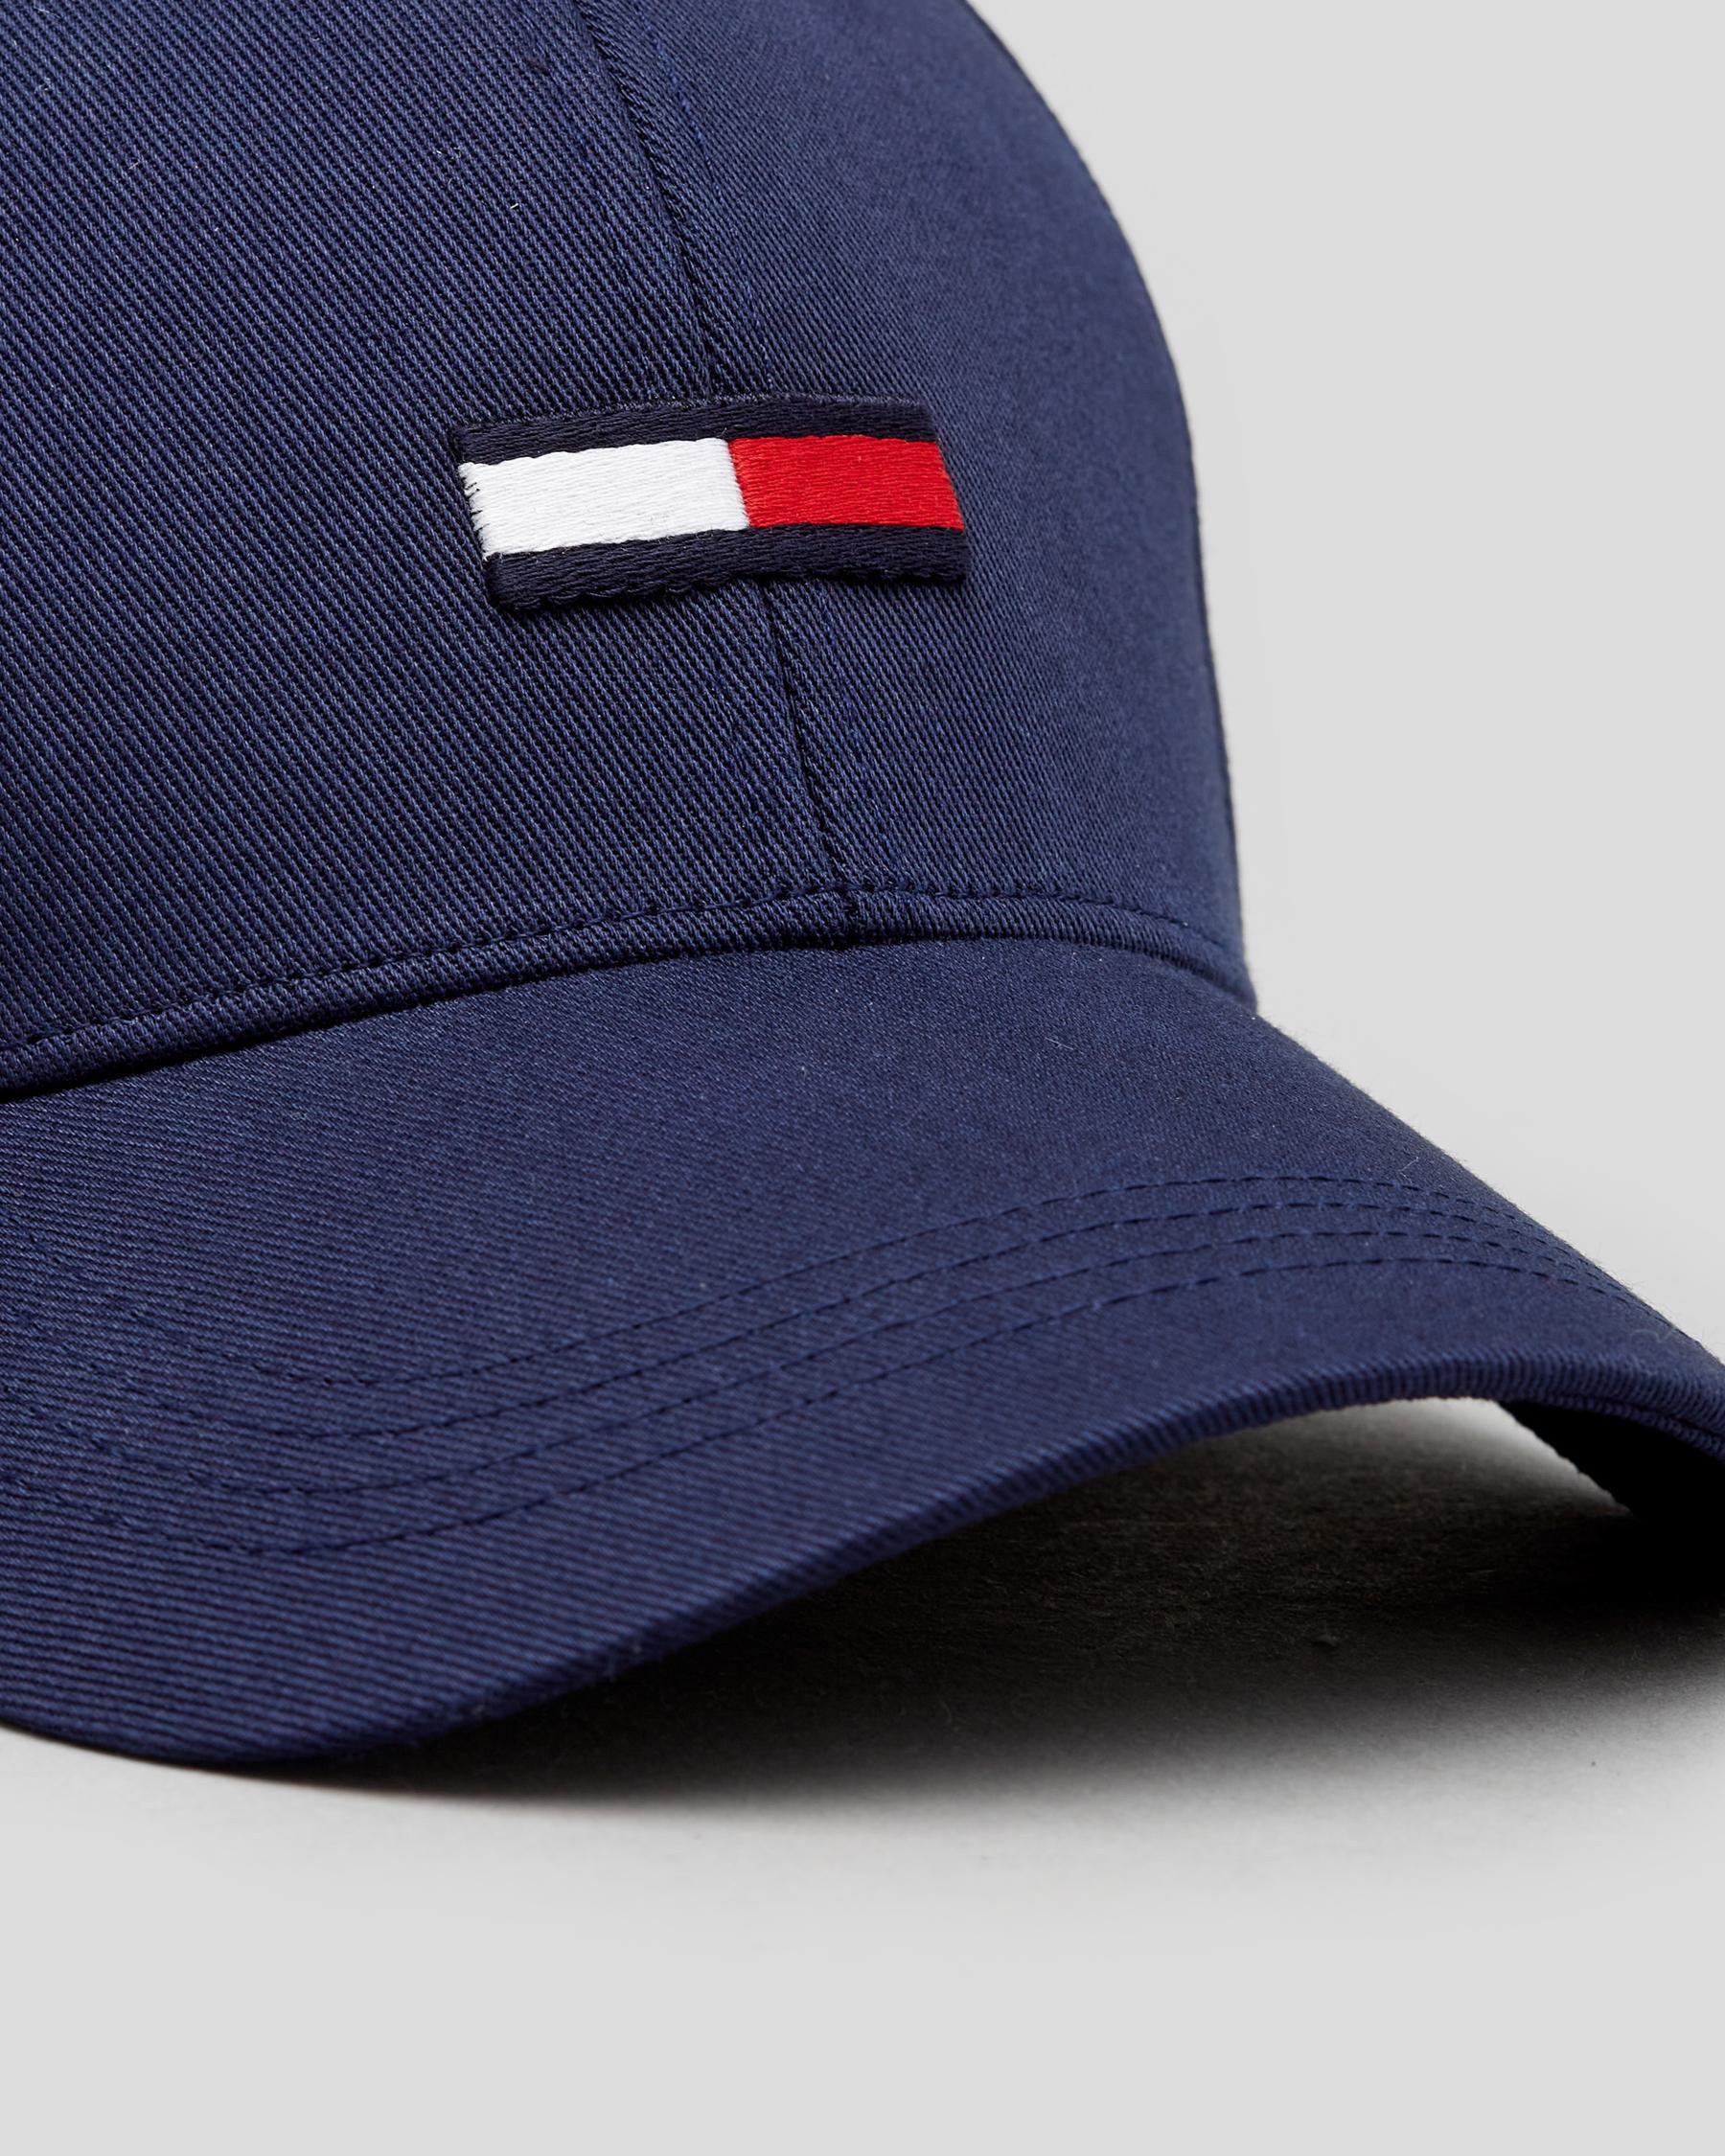 Flag Hilfiger States - United Returns - City FREE* TJM Shipping Navy Tommy Beach In & Easy Twilight Cap